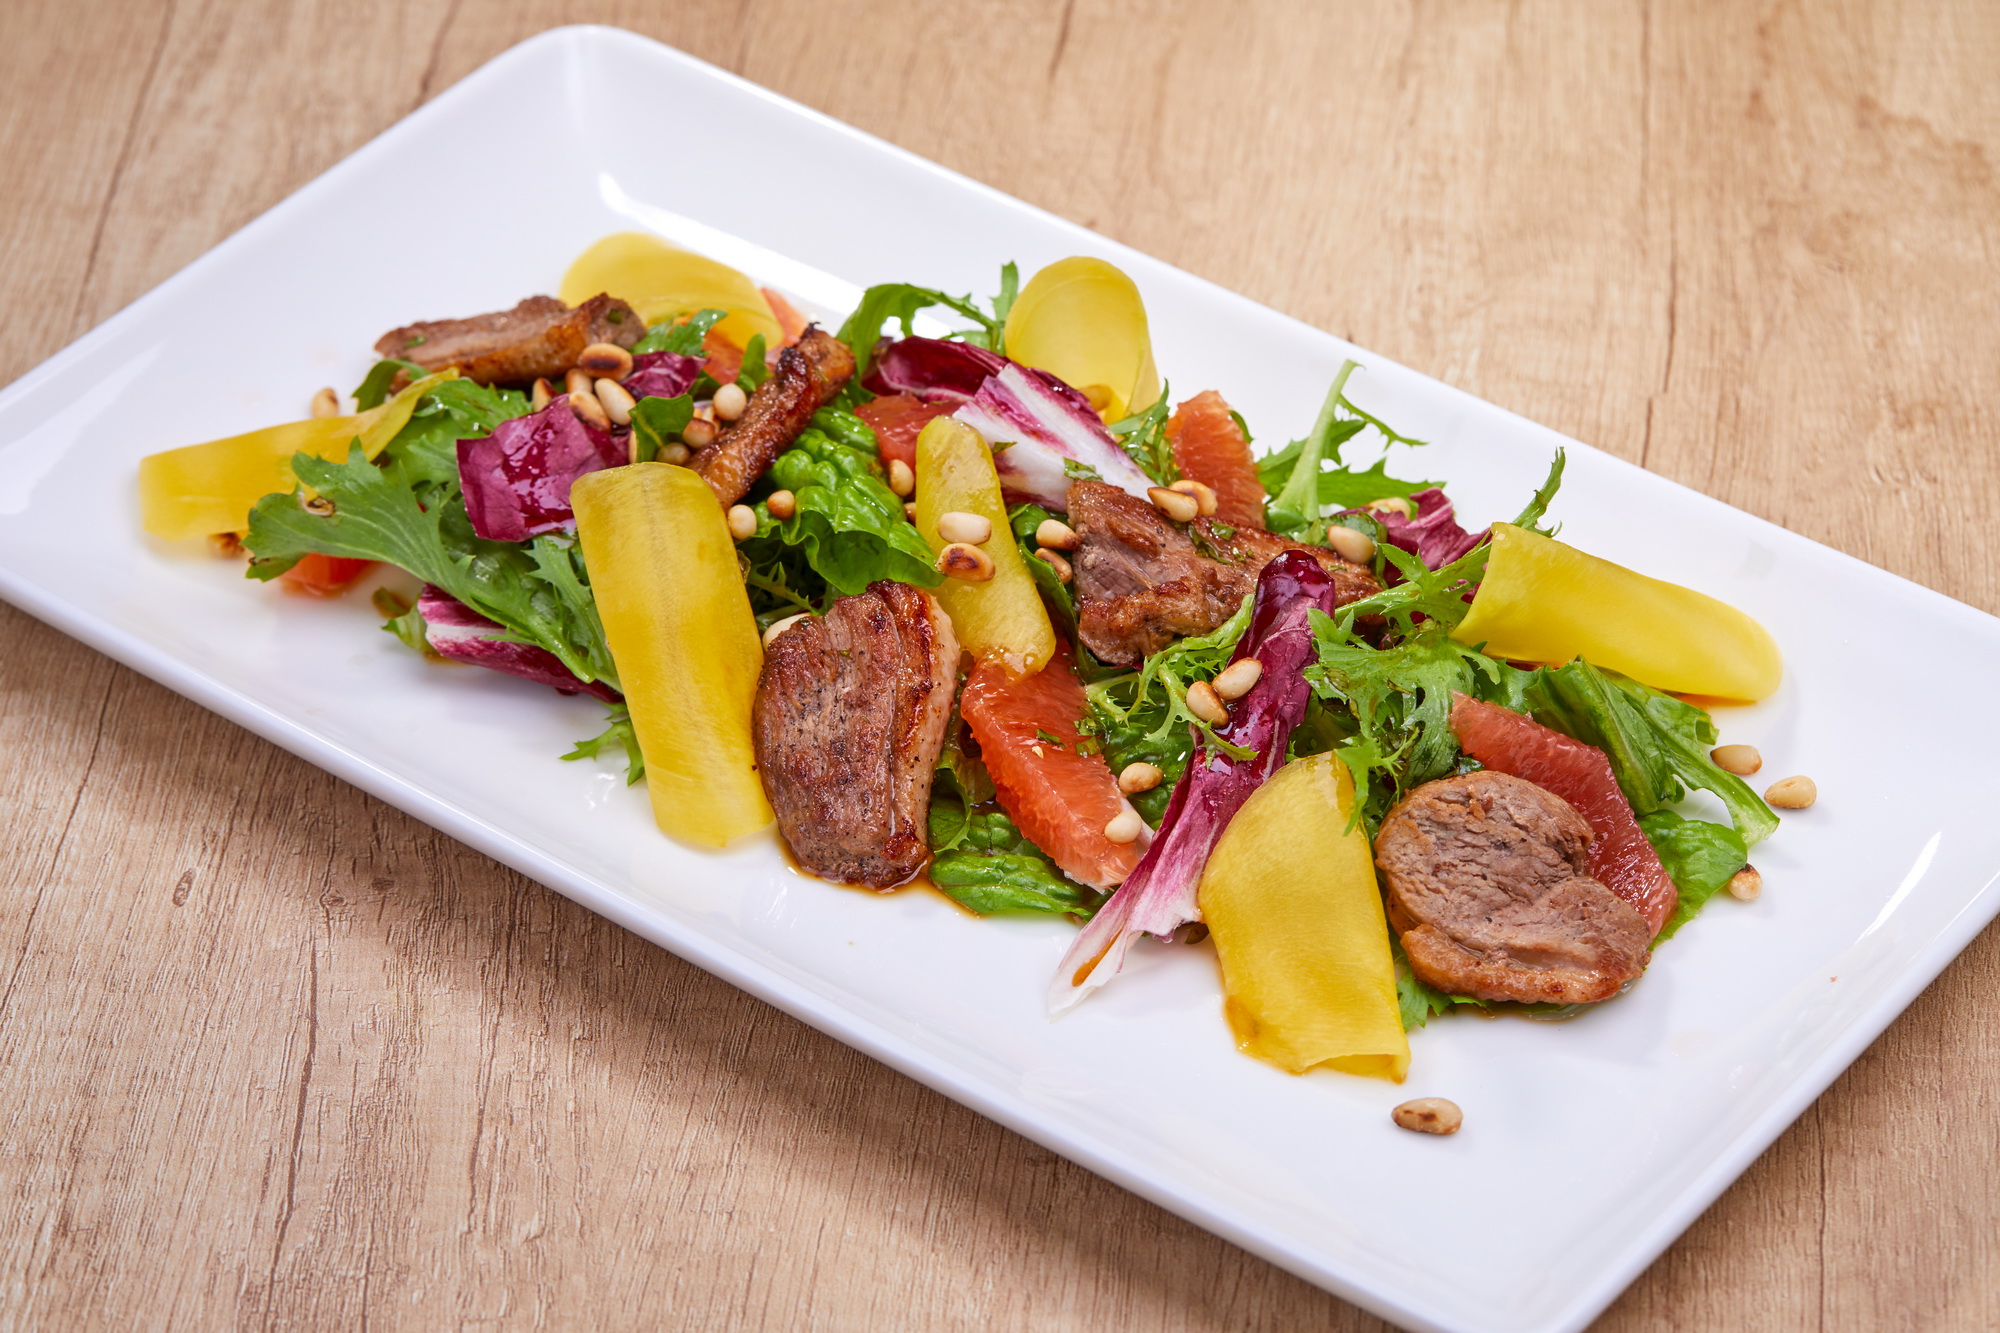 Salad with duck and orange